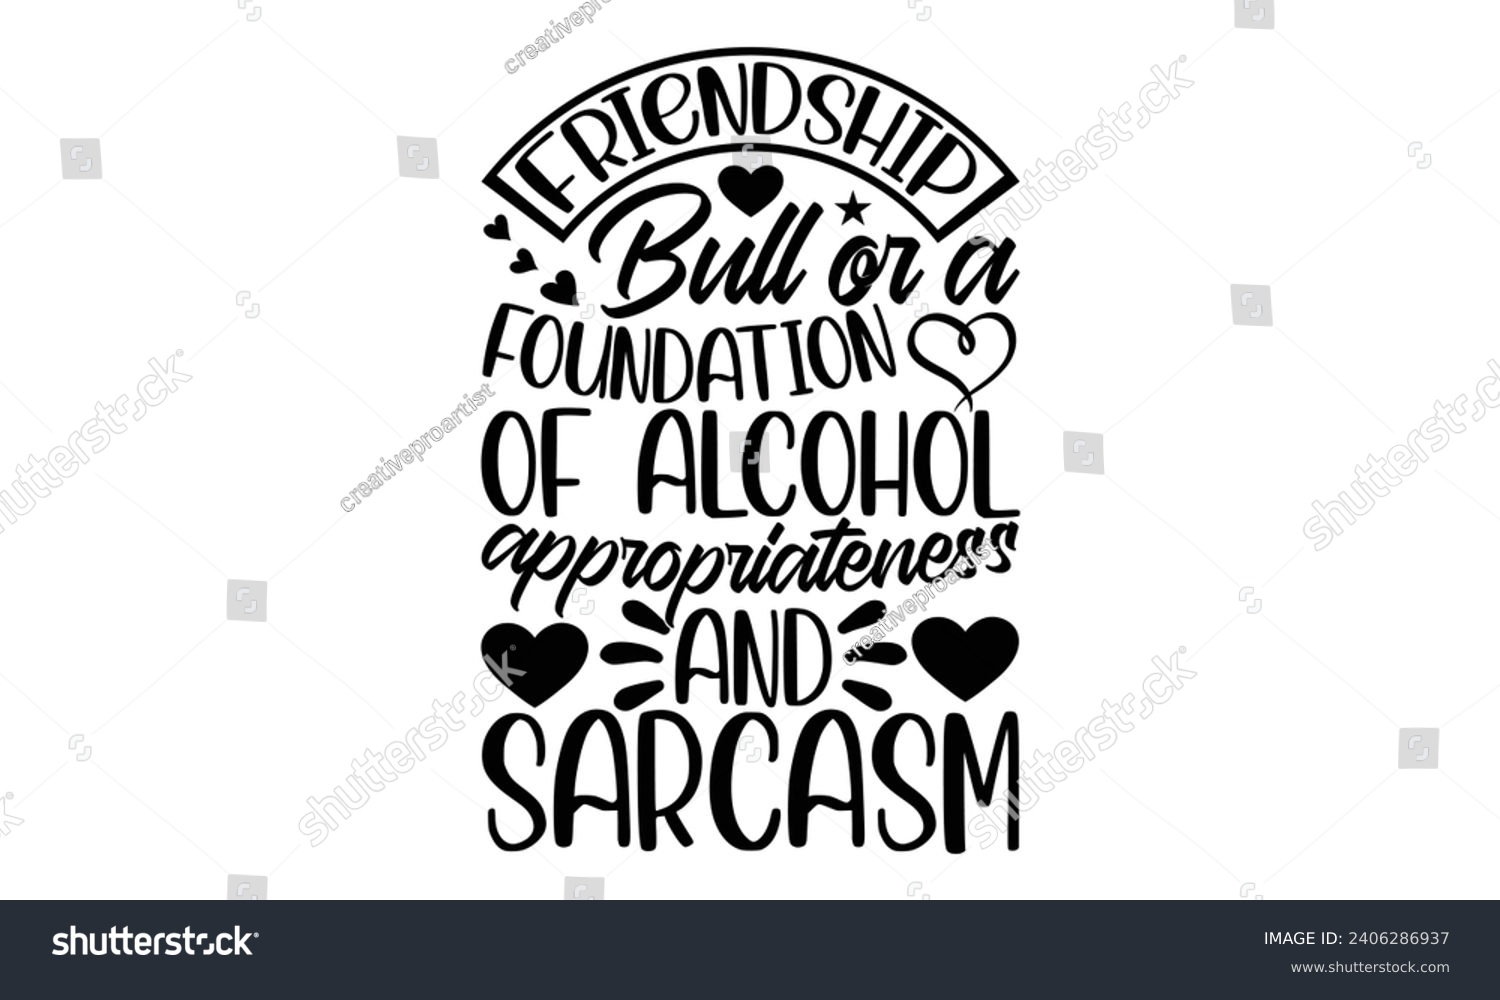 SVG of Friendship Bull Or A Foundation Of Alcohol Appropriateness And Sarcasm- Best friends t- shirt design, Hand drawn vintage illustration with hand-lettering and decoration elements, greeting card templat svg